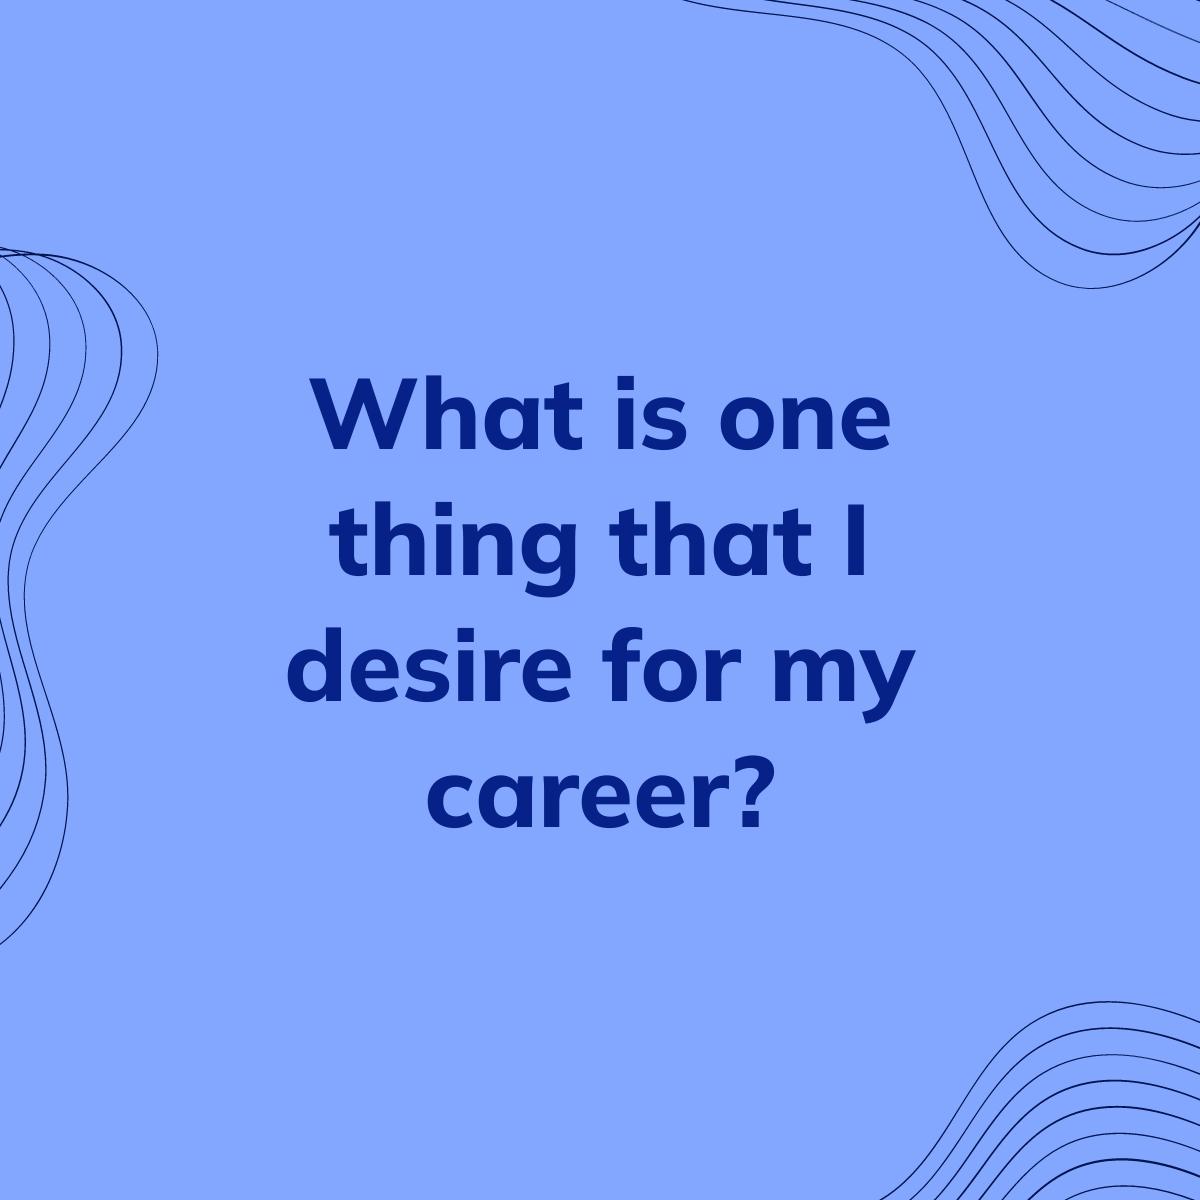 Journal Prompt: What is one thing that I desire for my career?